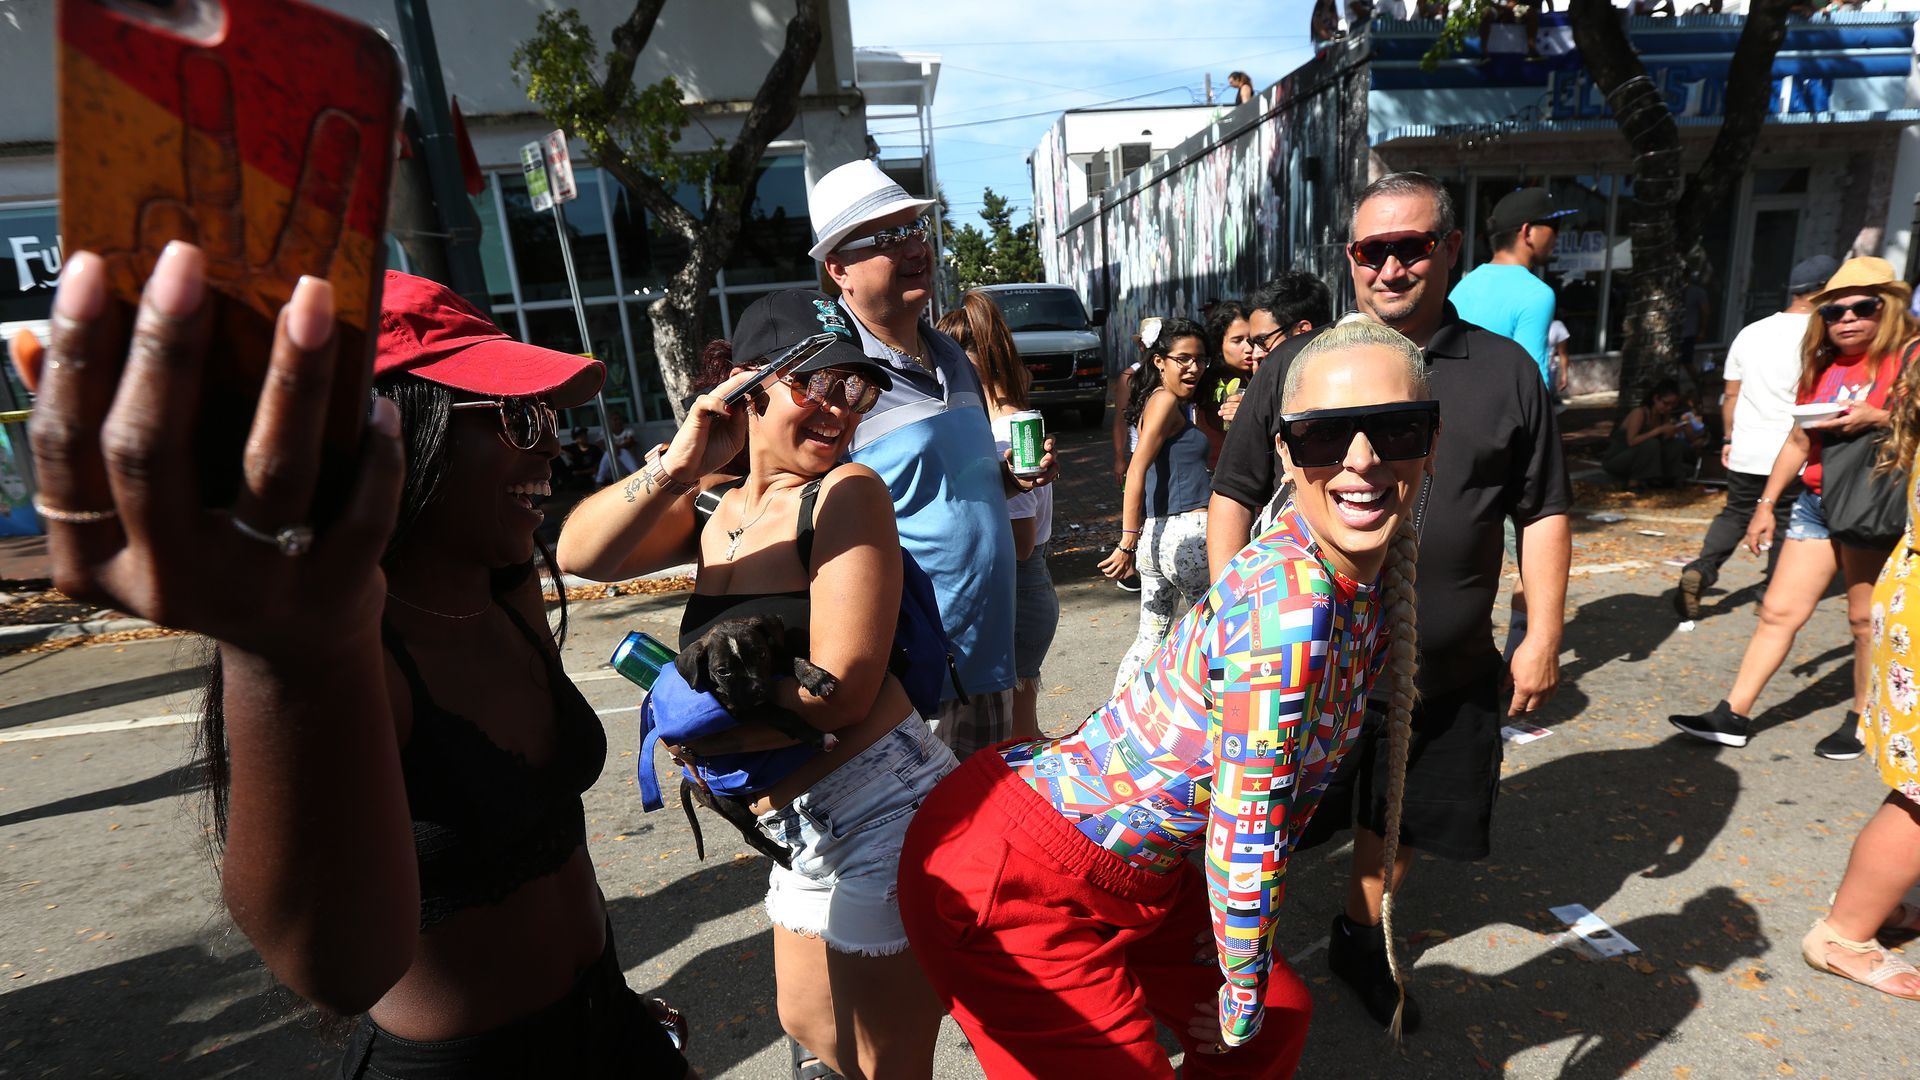 A woman wearing red pants, a colorful long-sleeved shirt and black sunglasses dances in the street.